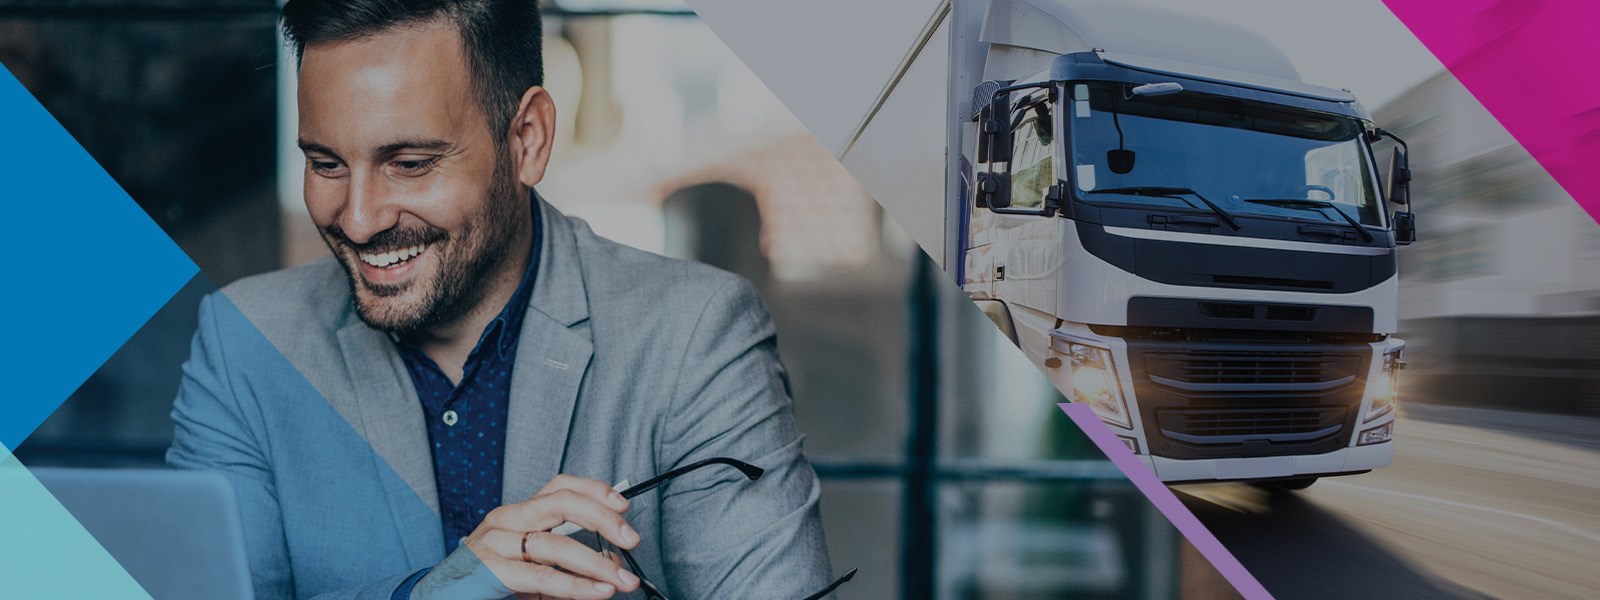 CCL Supply Chain and Logistics Header Image with smiling man and truck